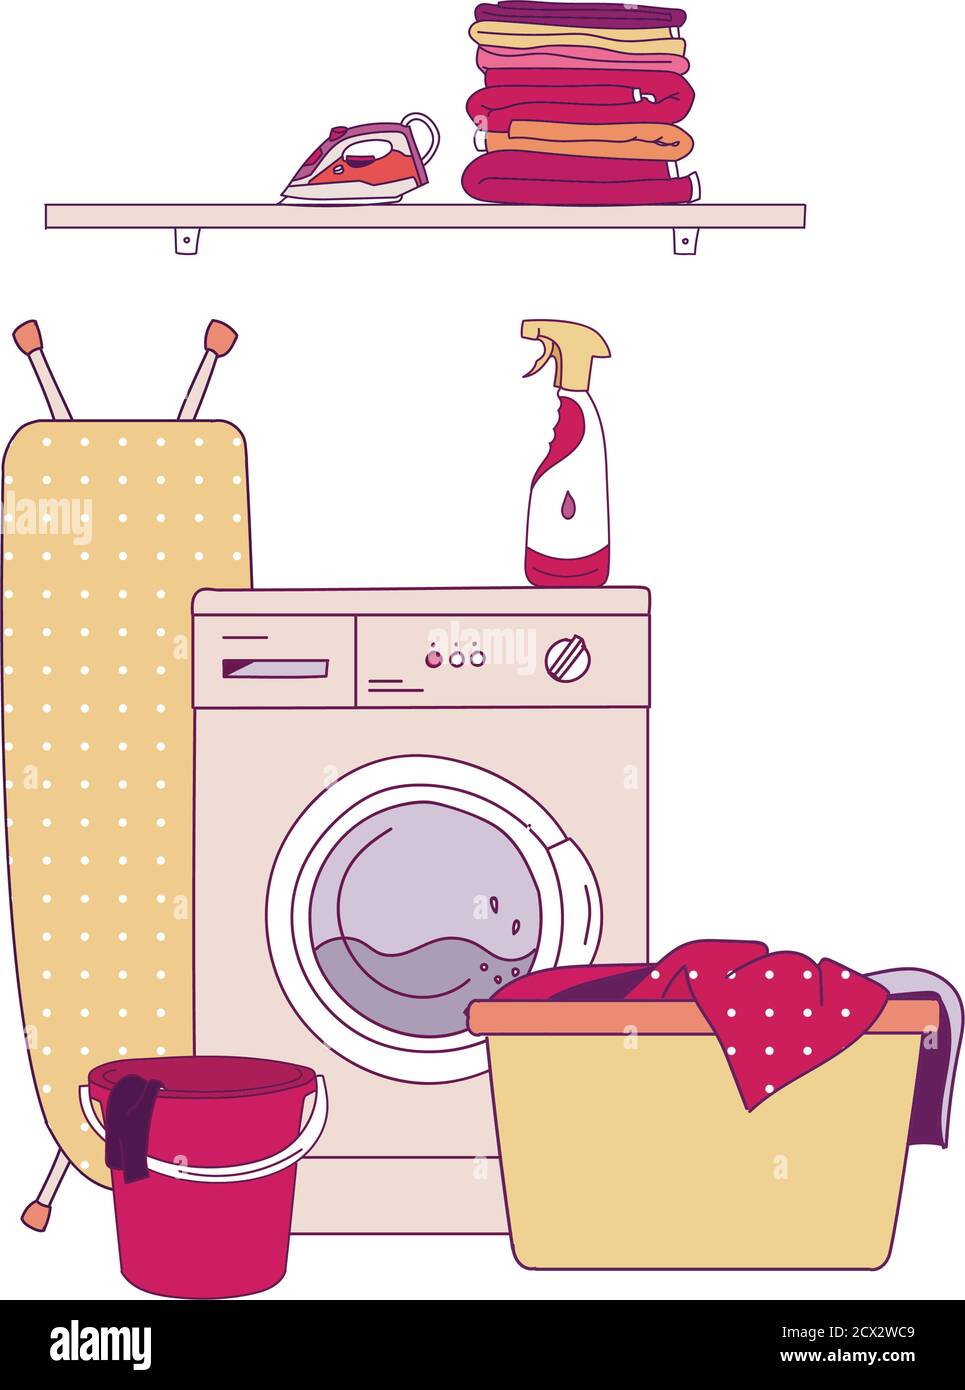 Laundry room interior. Utility room with washing machine, cleaning  equipment, home cleaners, clean wipes, hanging colorful shirts on  clothesline on wh Stock Photo - Alamy